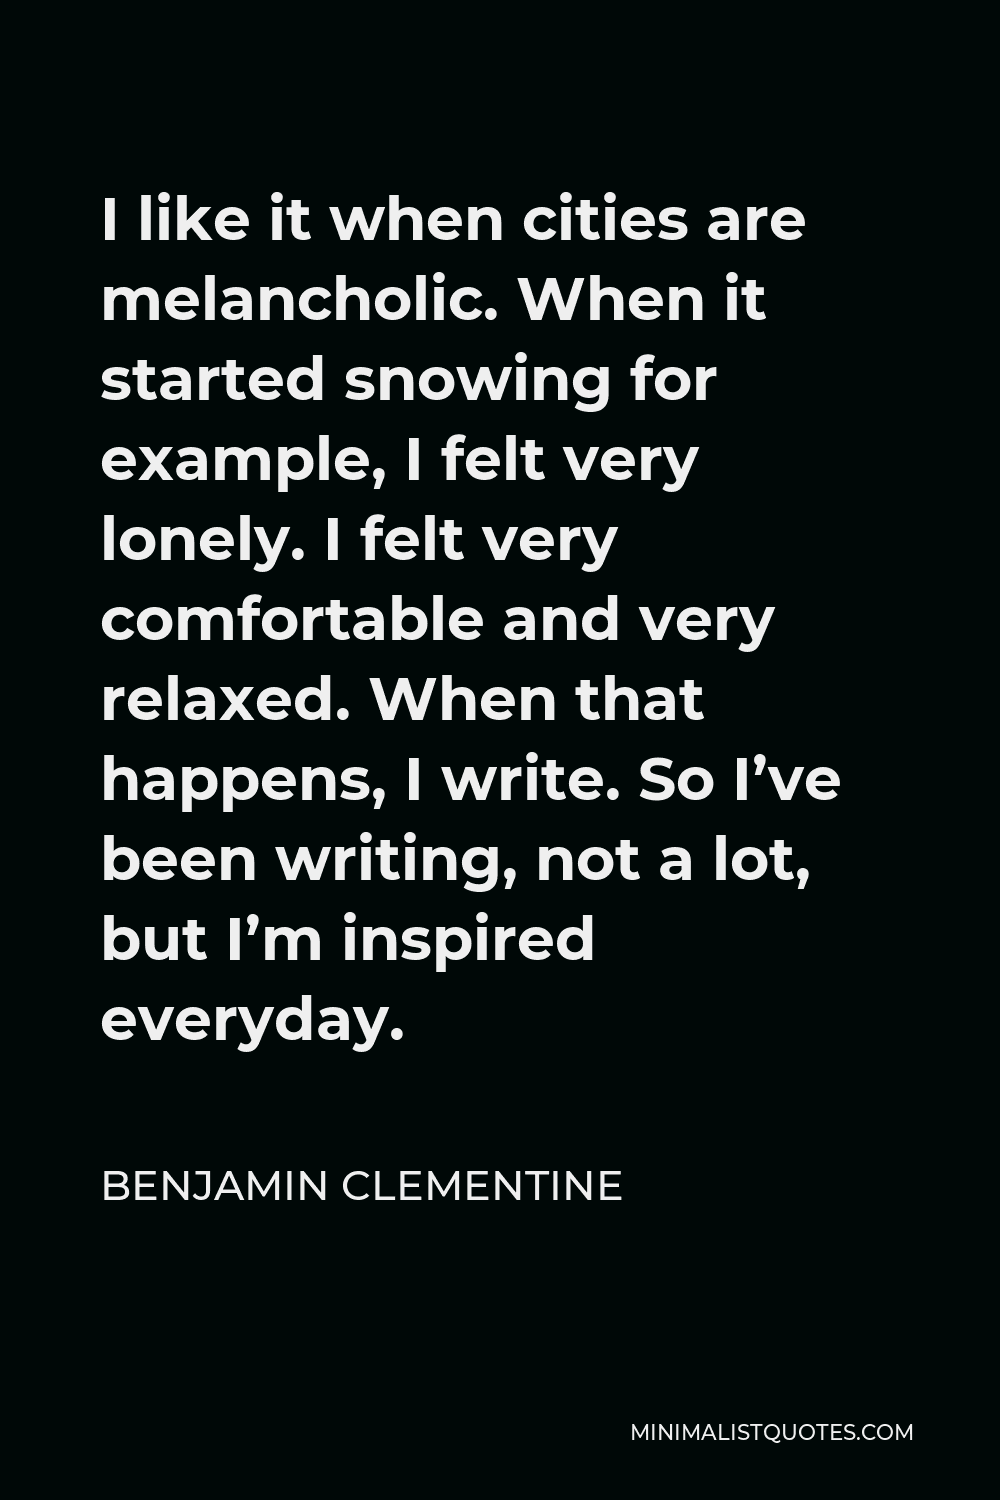 Benjamin Clementine Quote - I like it when cities are melancholic. When it started snowing for example, I felt very lonely. I felt very comfortable and very relaxed. When that happens, I write. So I’ve been writing, not a lot, but I’m inspired everyday.